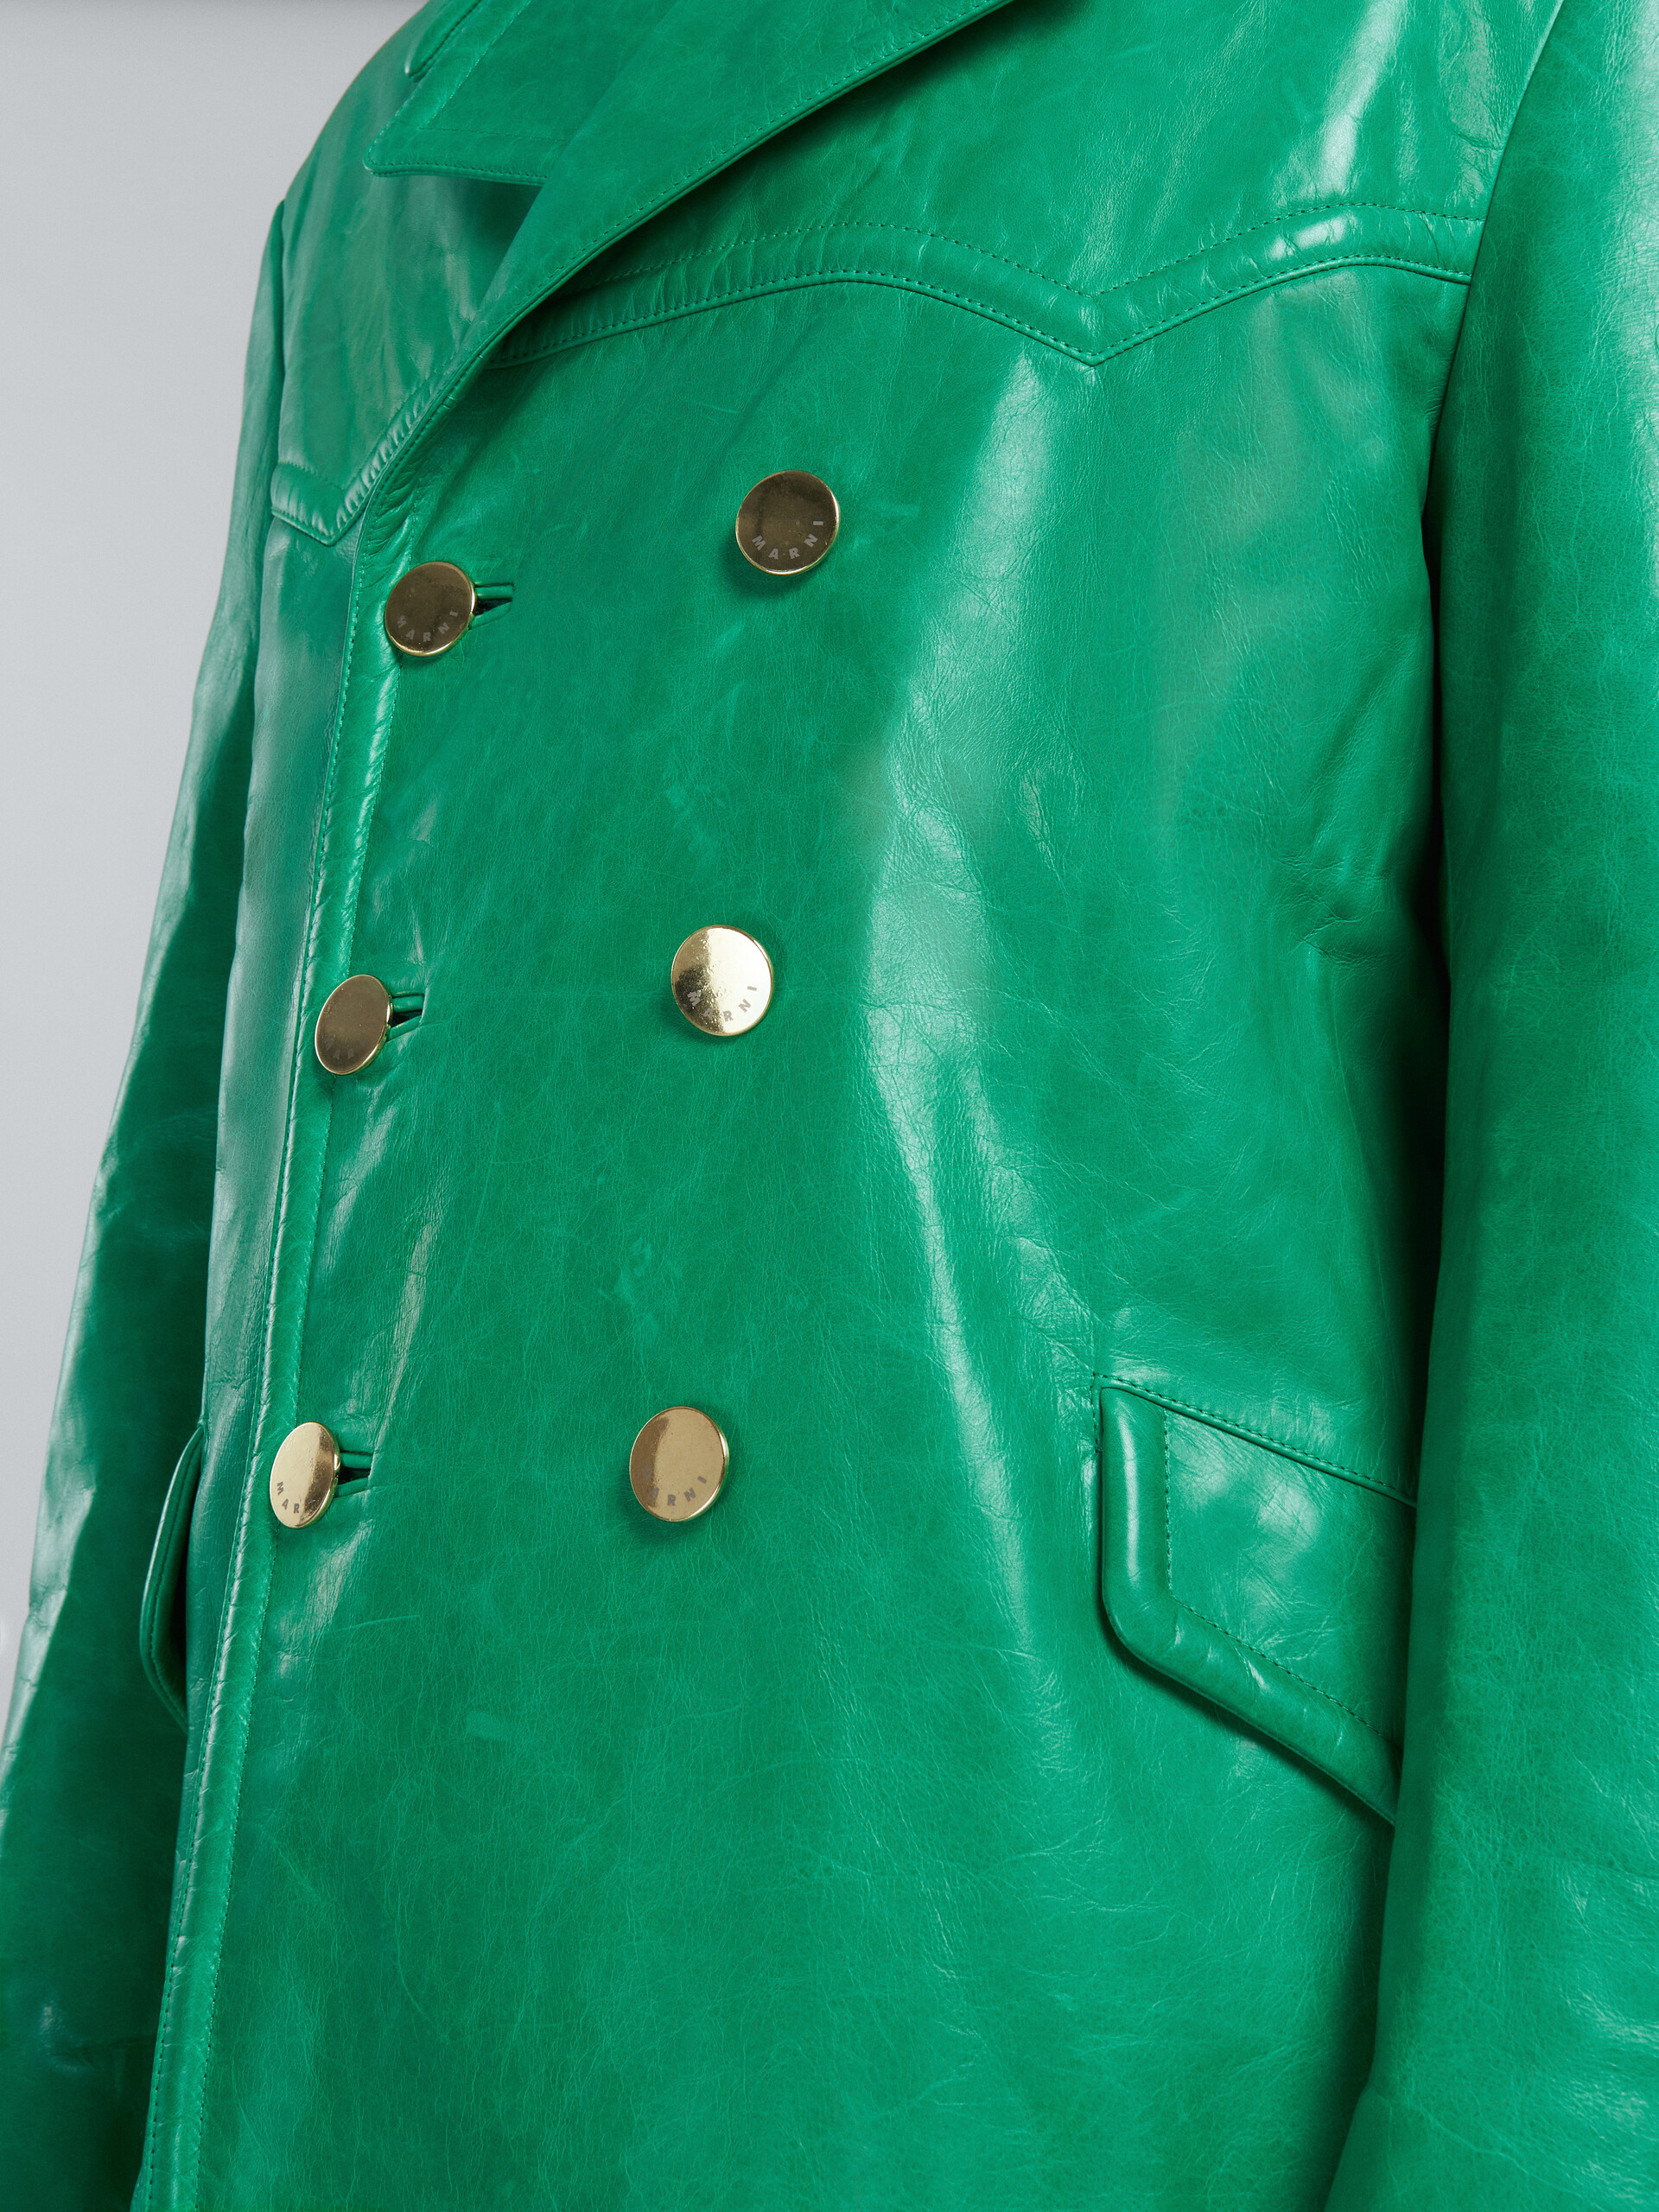 Double-breasted jacket in shiny green leather - Coat - Image 5